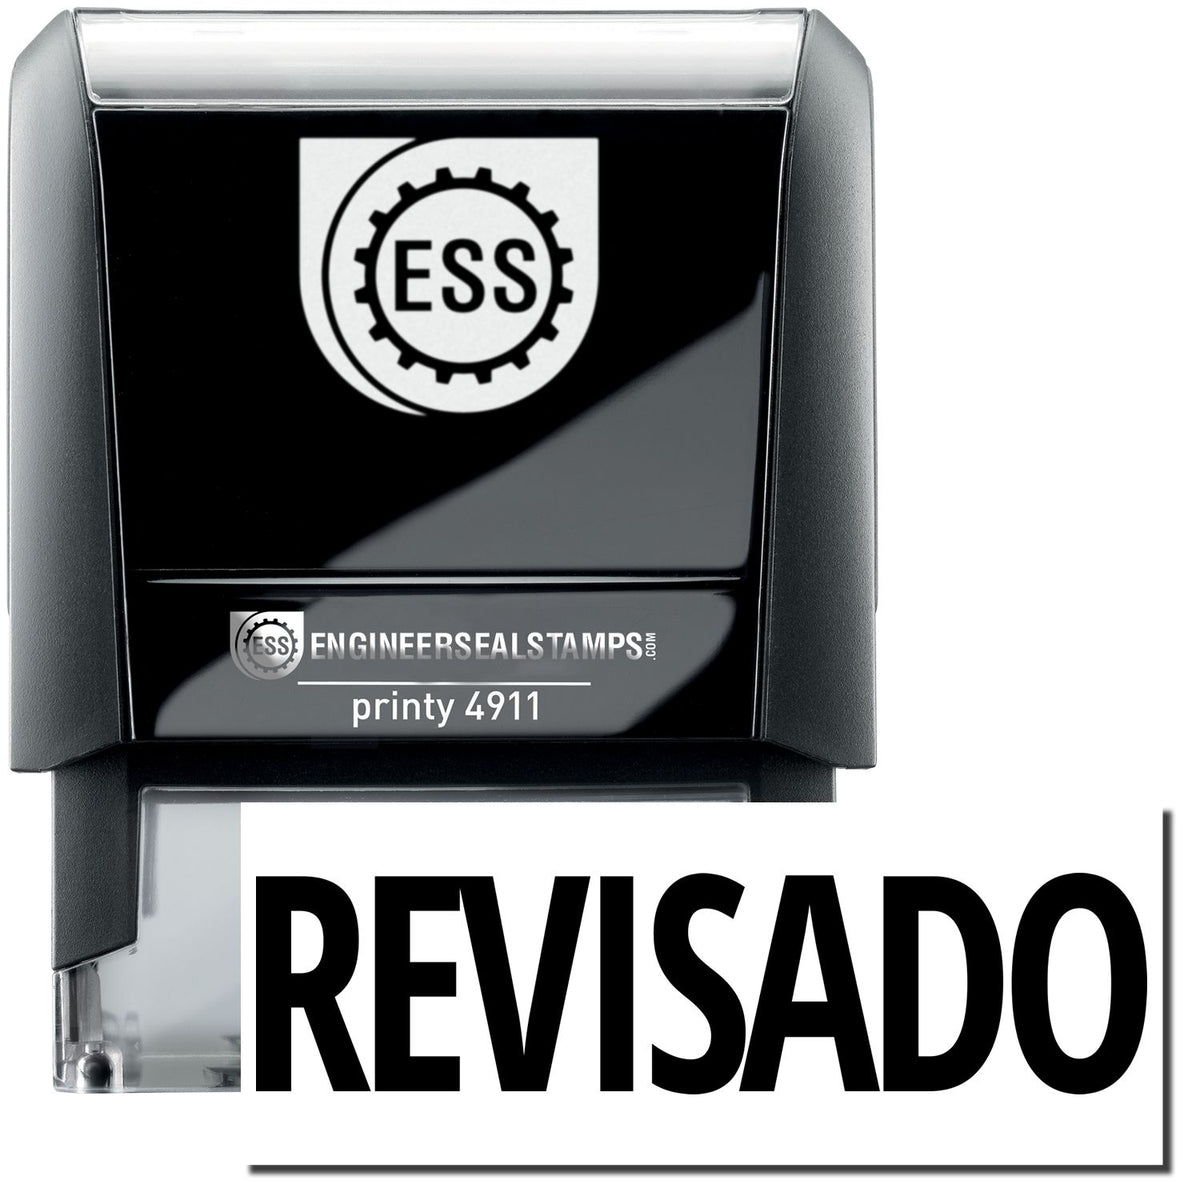 A self-inking stamp with a stamped image showing how the text &quot;REVISADO&quot; is displayed after stamping.